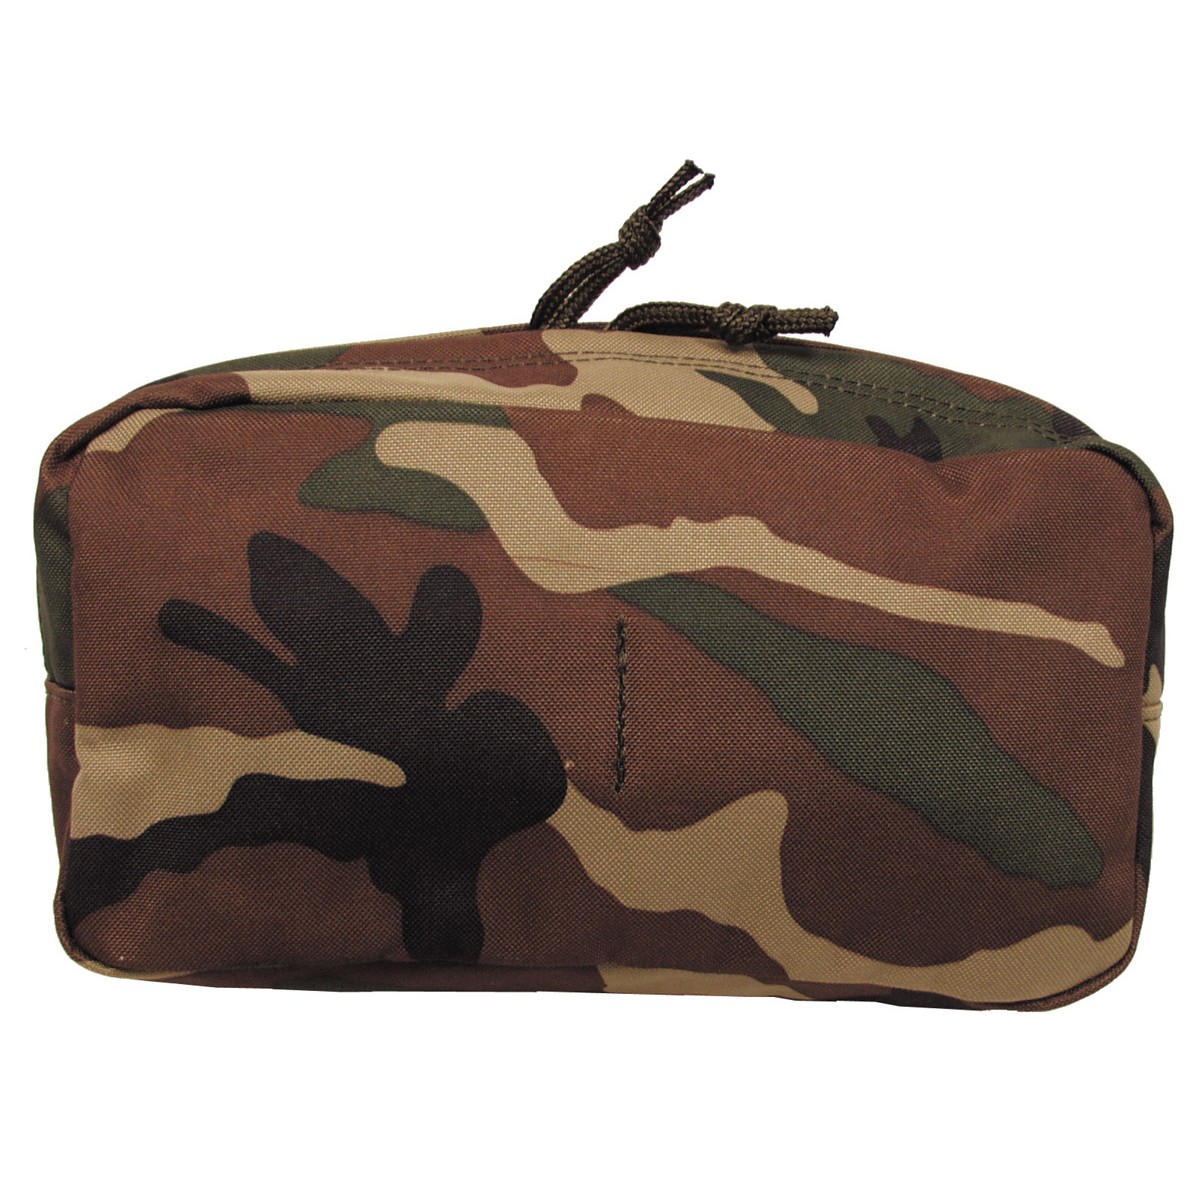 Tactical Utility Mollle Large Pouch - Woodland